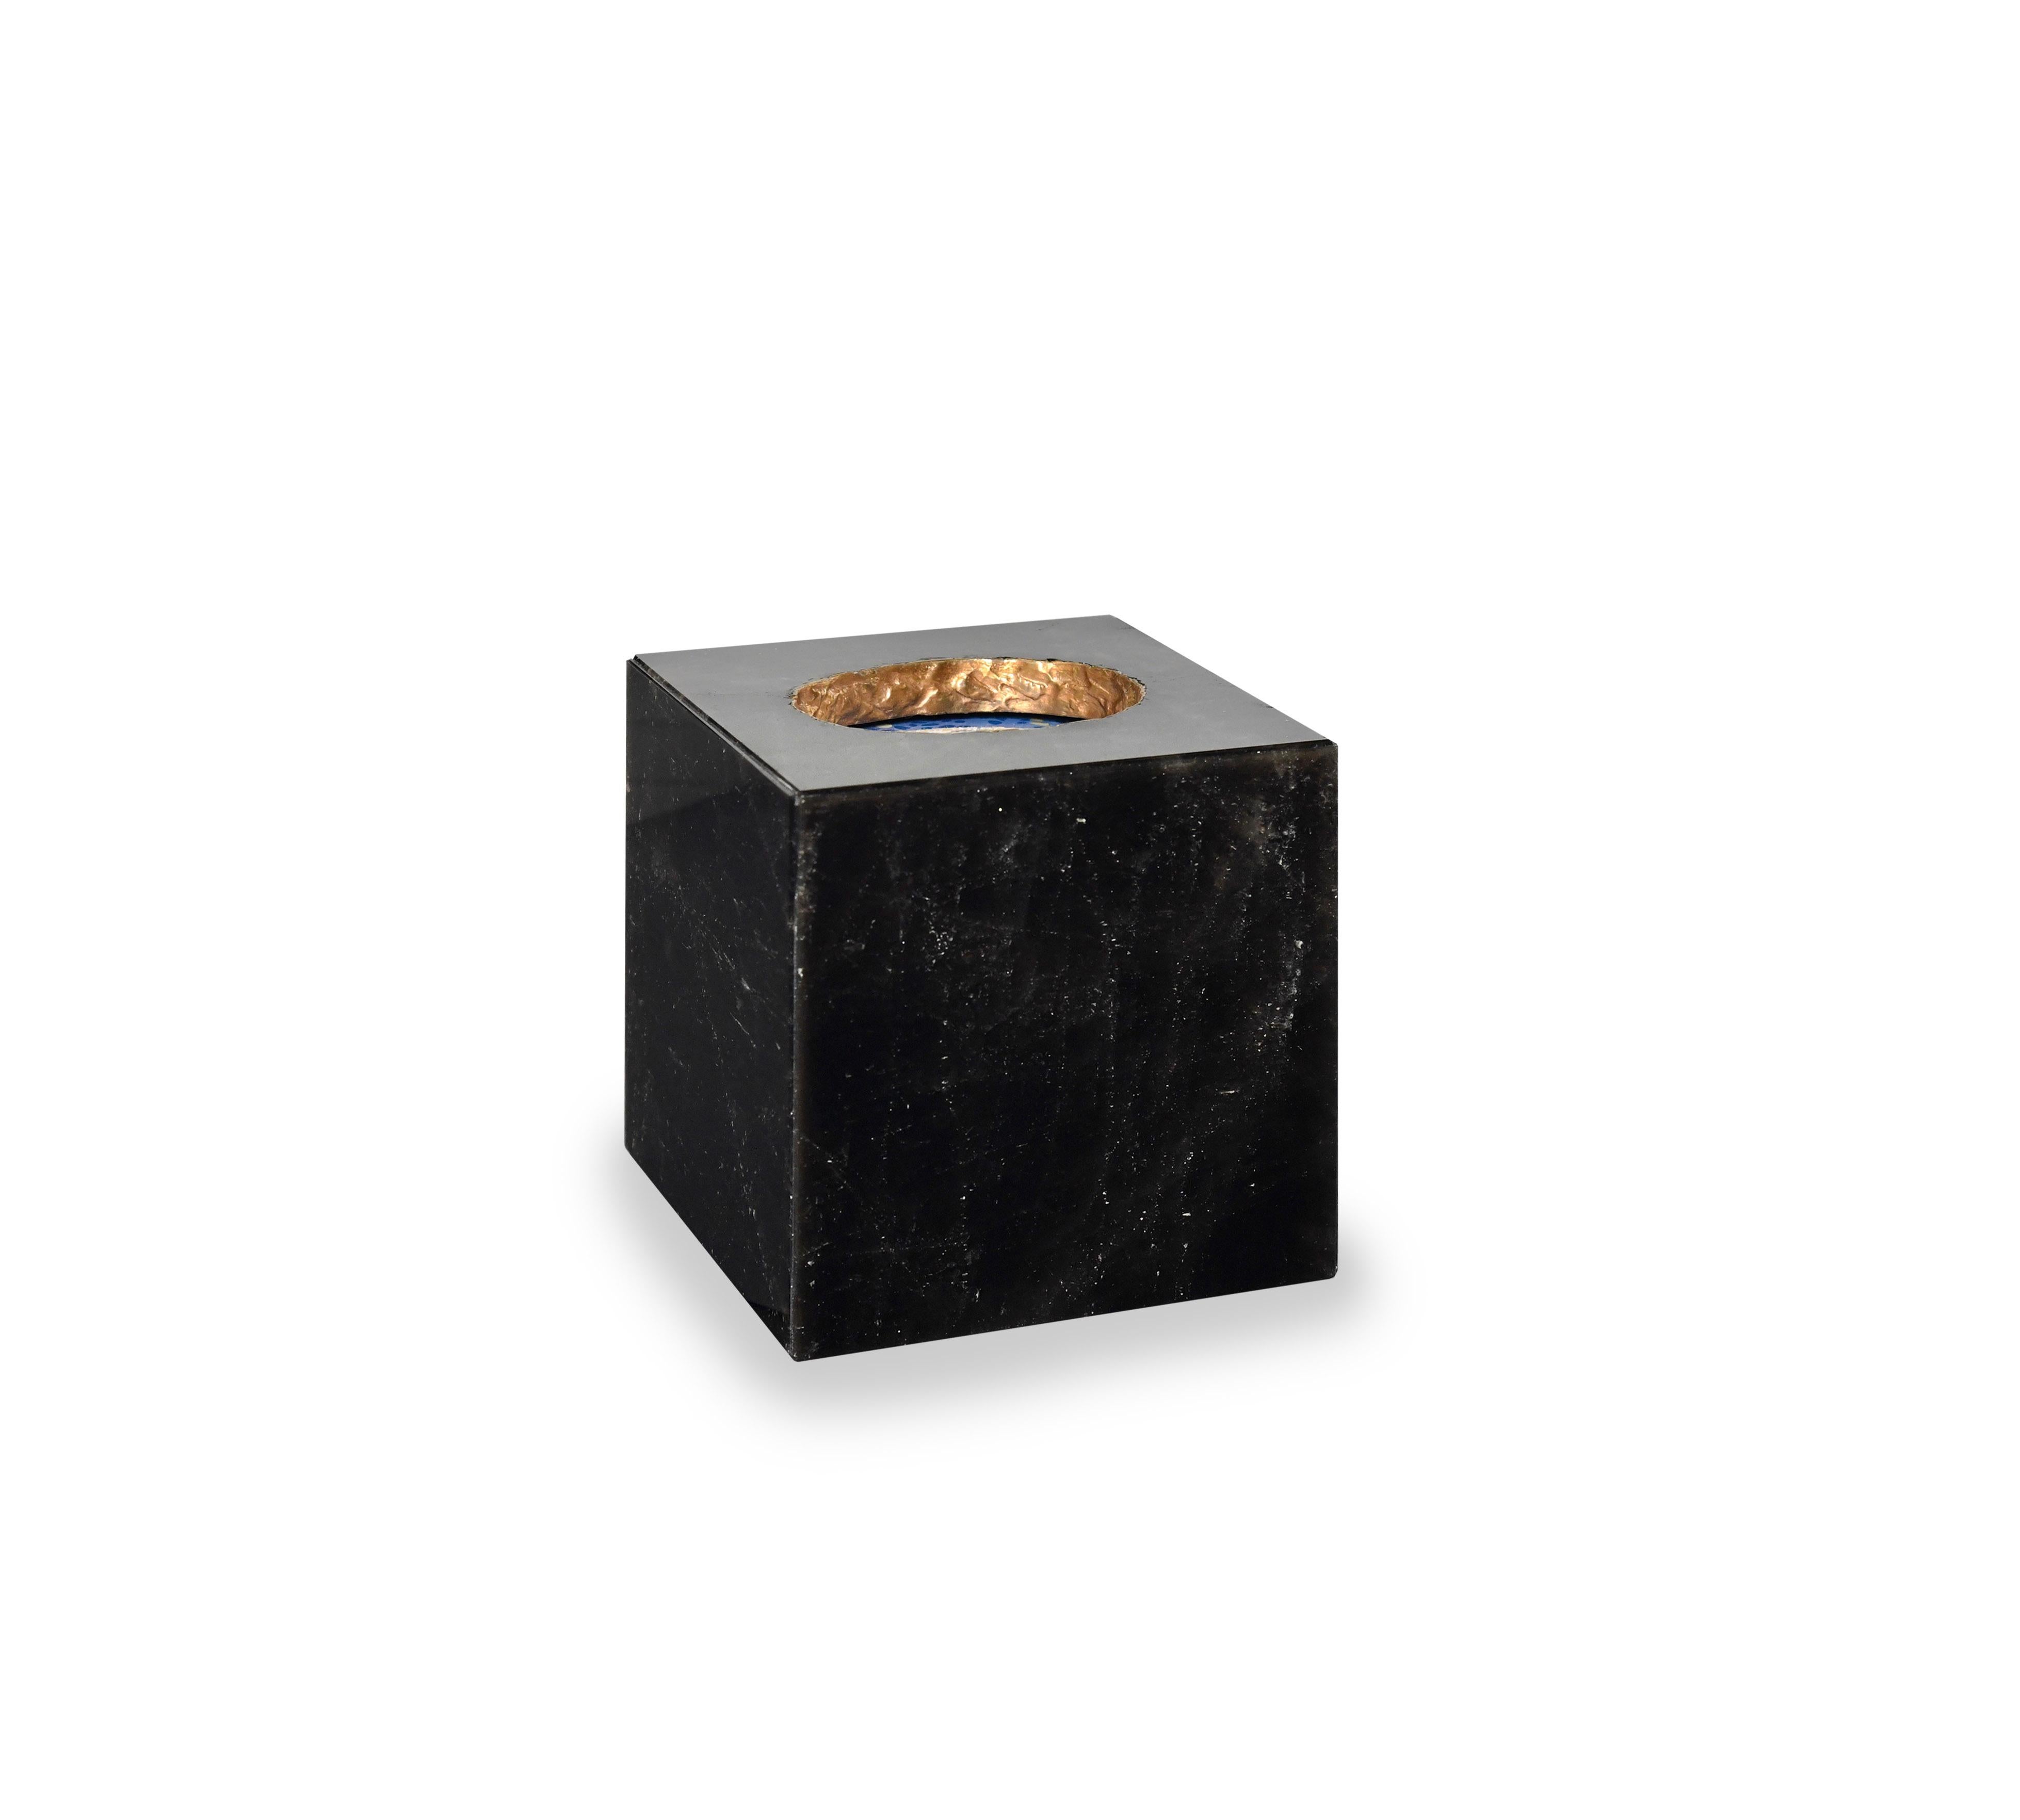 Smoky rock crystal tissue box with brass metal decoration on the top rim. Created by Phoenix Gallery, NYC.